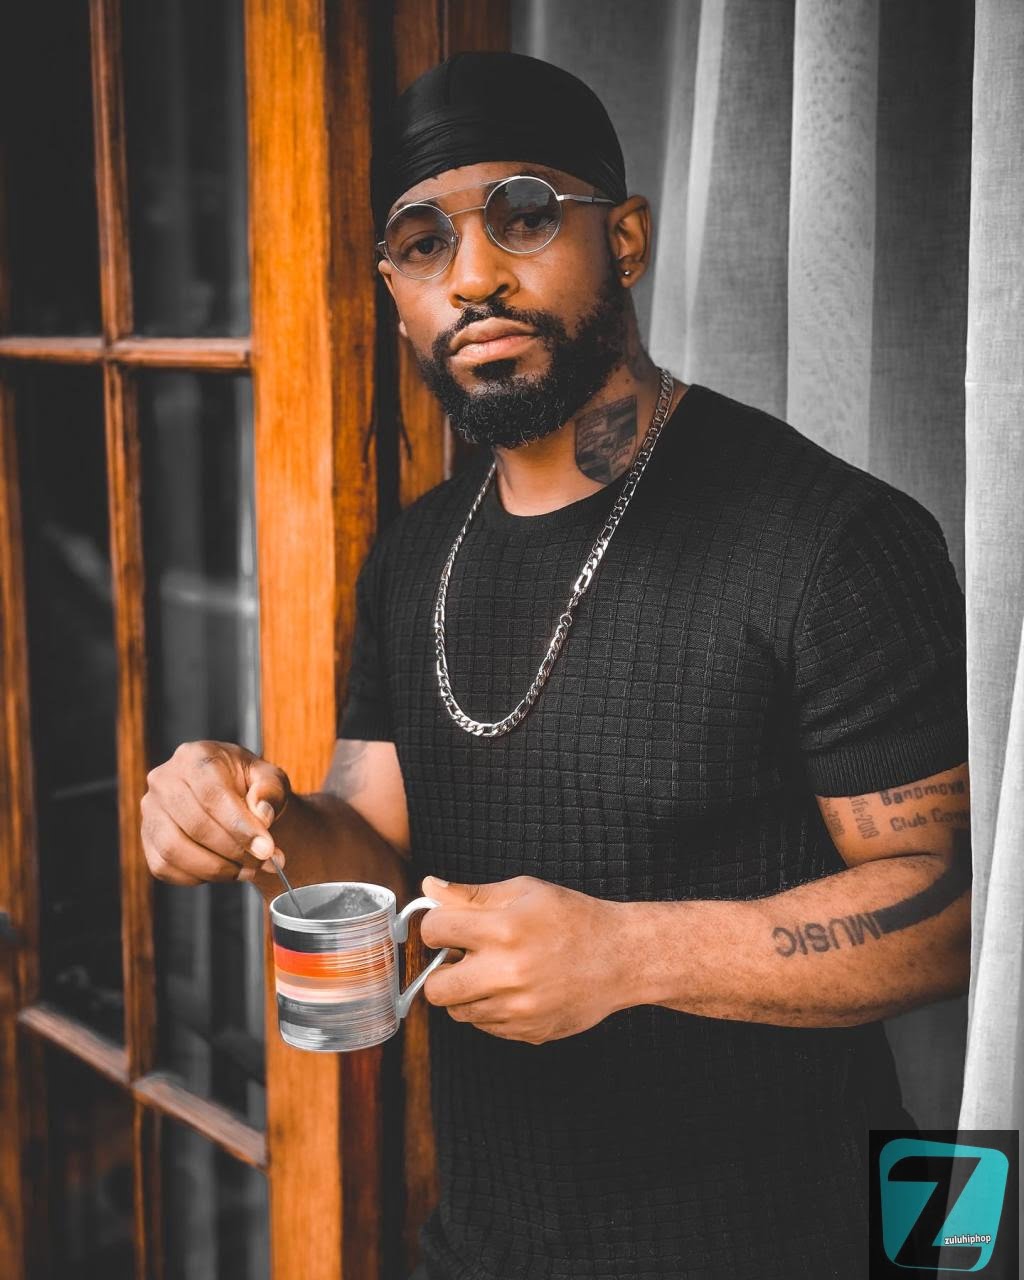 Prince Kaybee – If You Don’t Hear From Me Know That I’m With My Family